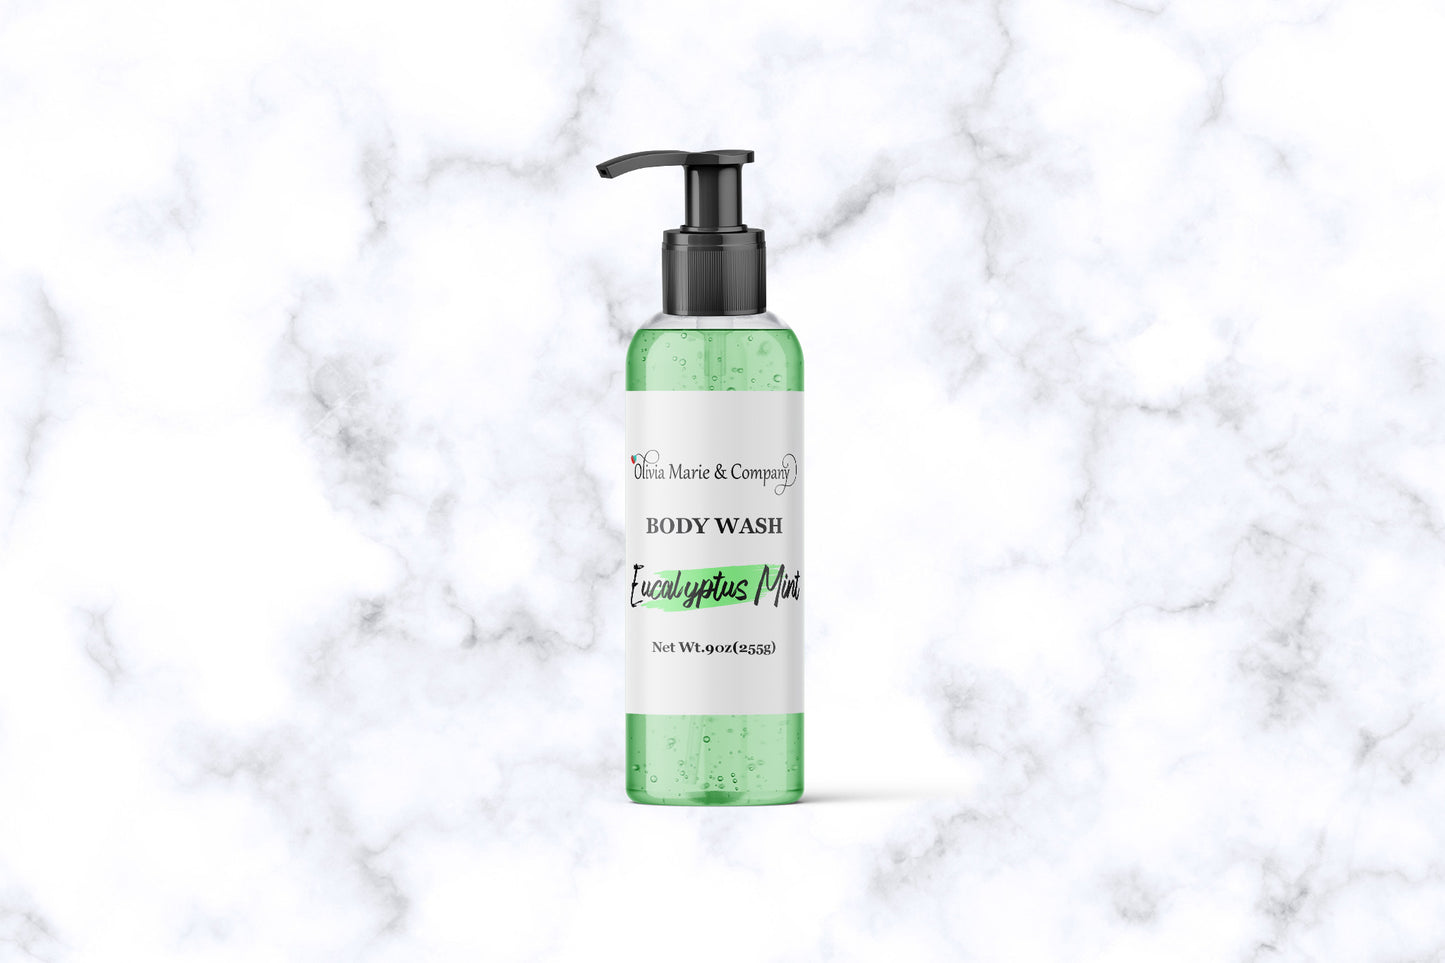 Eucalyptus mint body wash in a clear bottle with a light green liquid